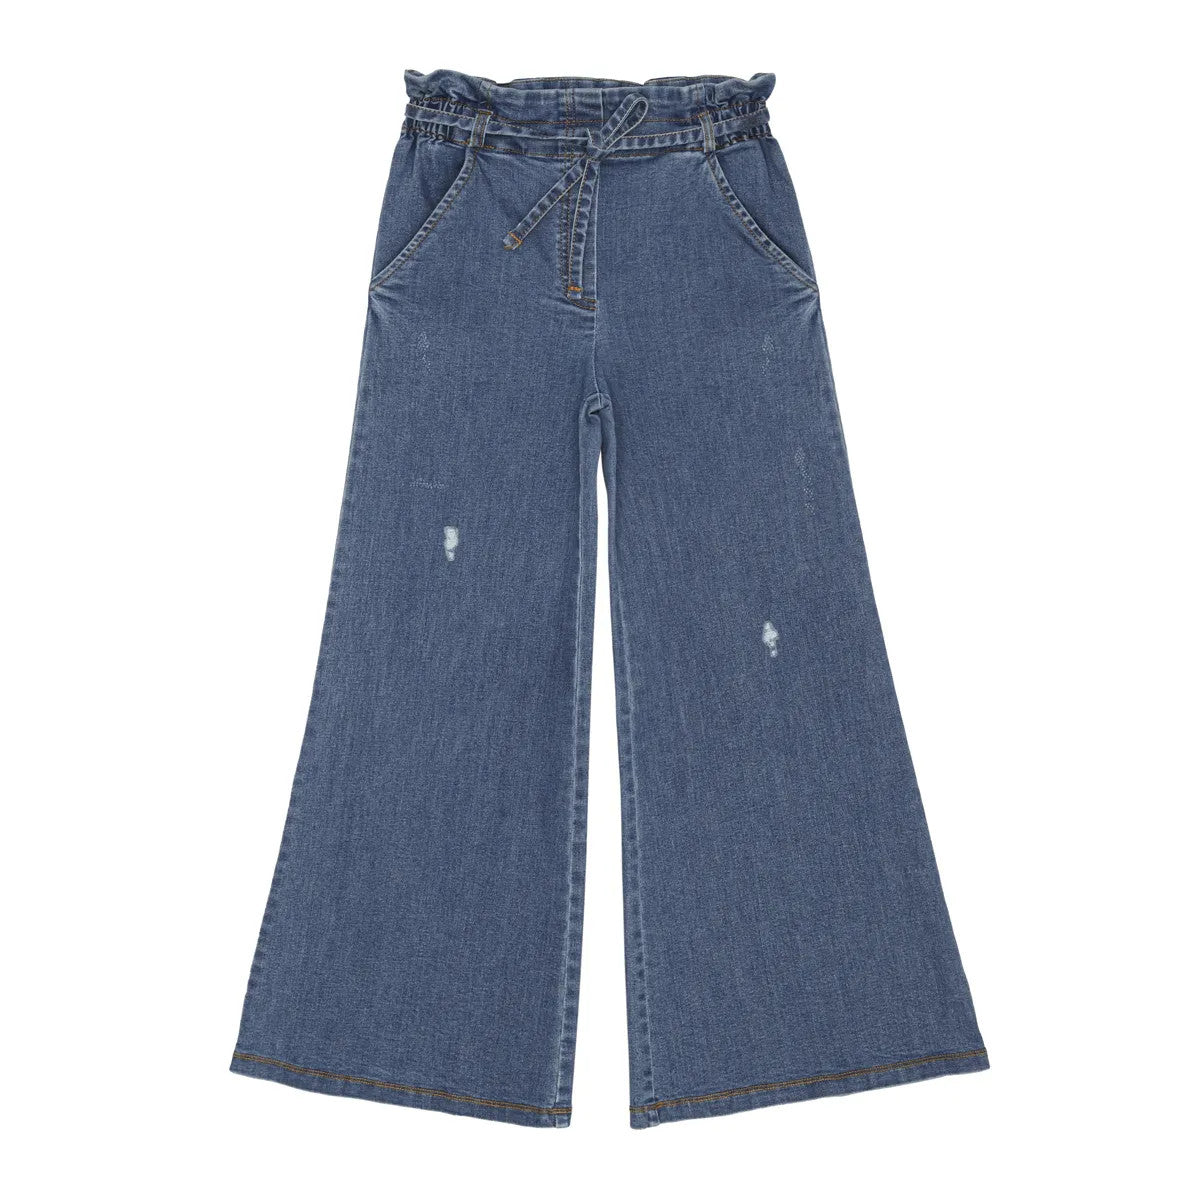 Little Hedonist high-waist wide-leg pants with elastic band in the waist. Denim authentic indigo. Easy to wear and match, with a strap to finish the look. Sustainable kids clothing made form organic cotton.